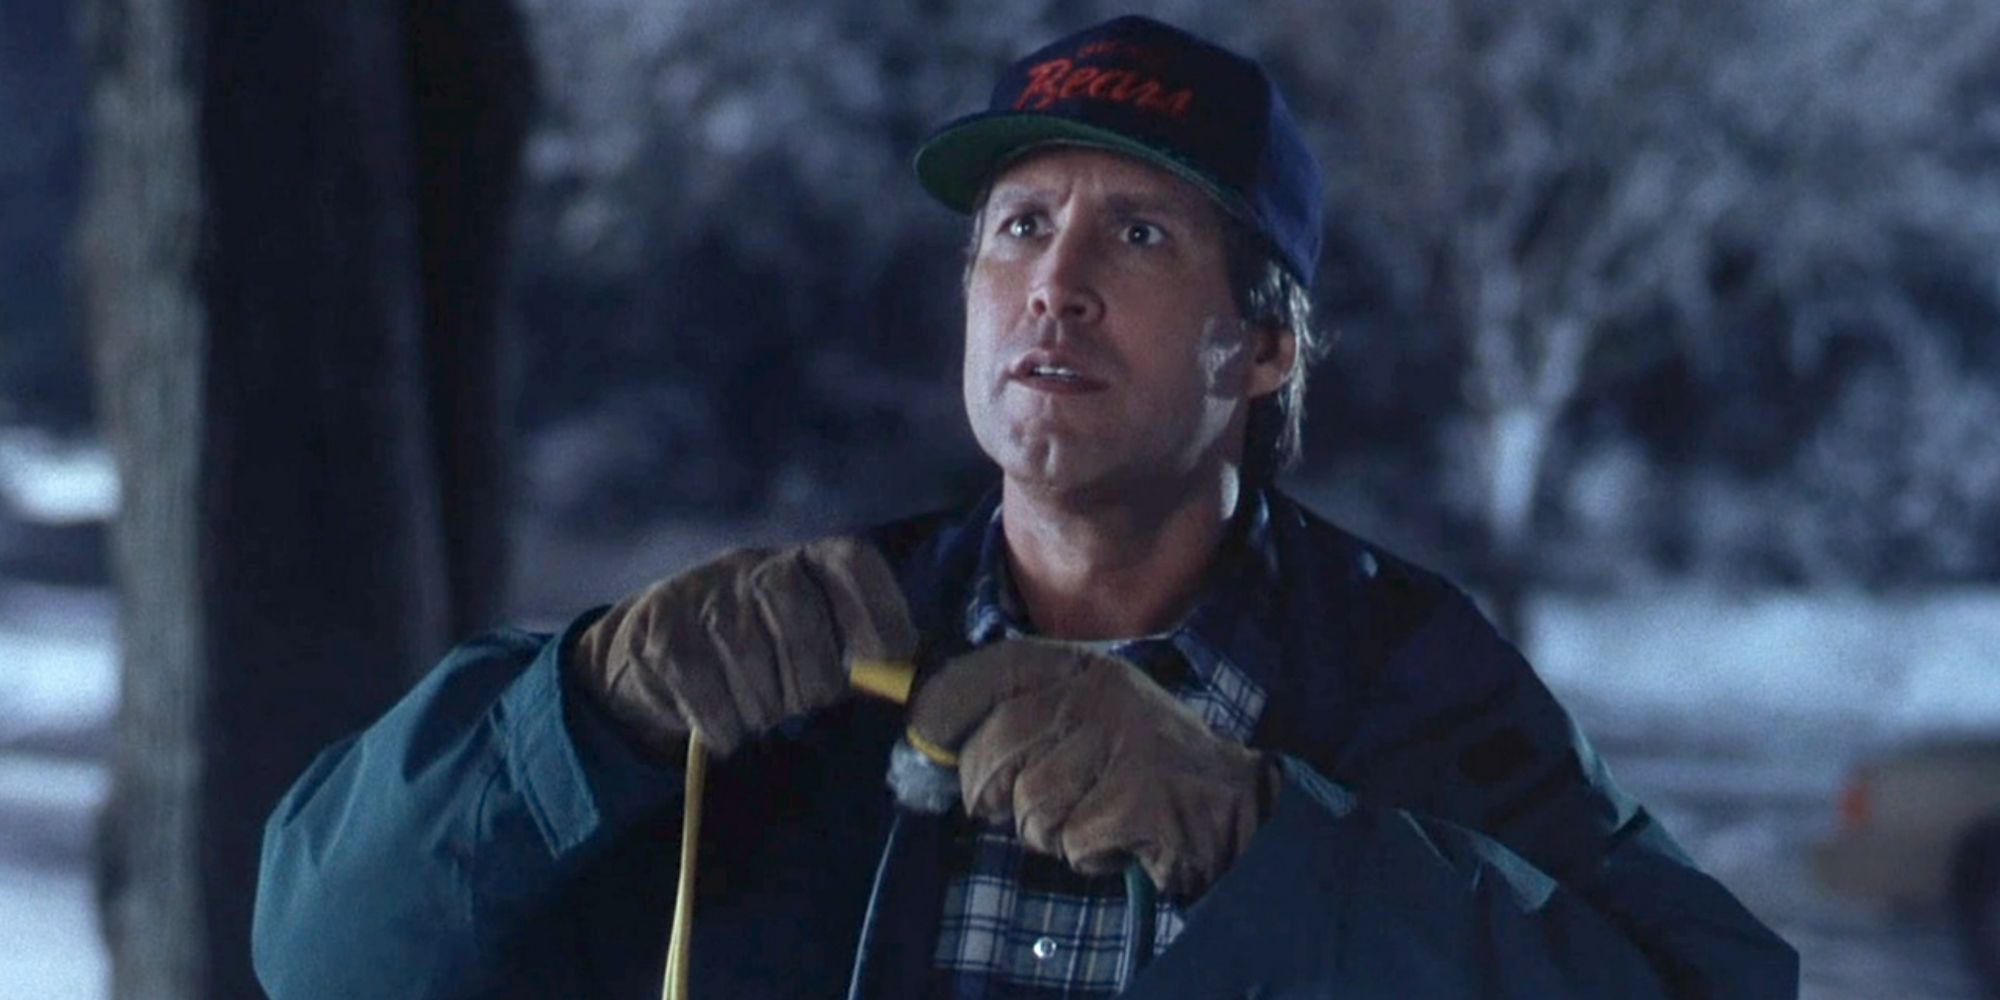 Chevy Chase In Christmas Vacation